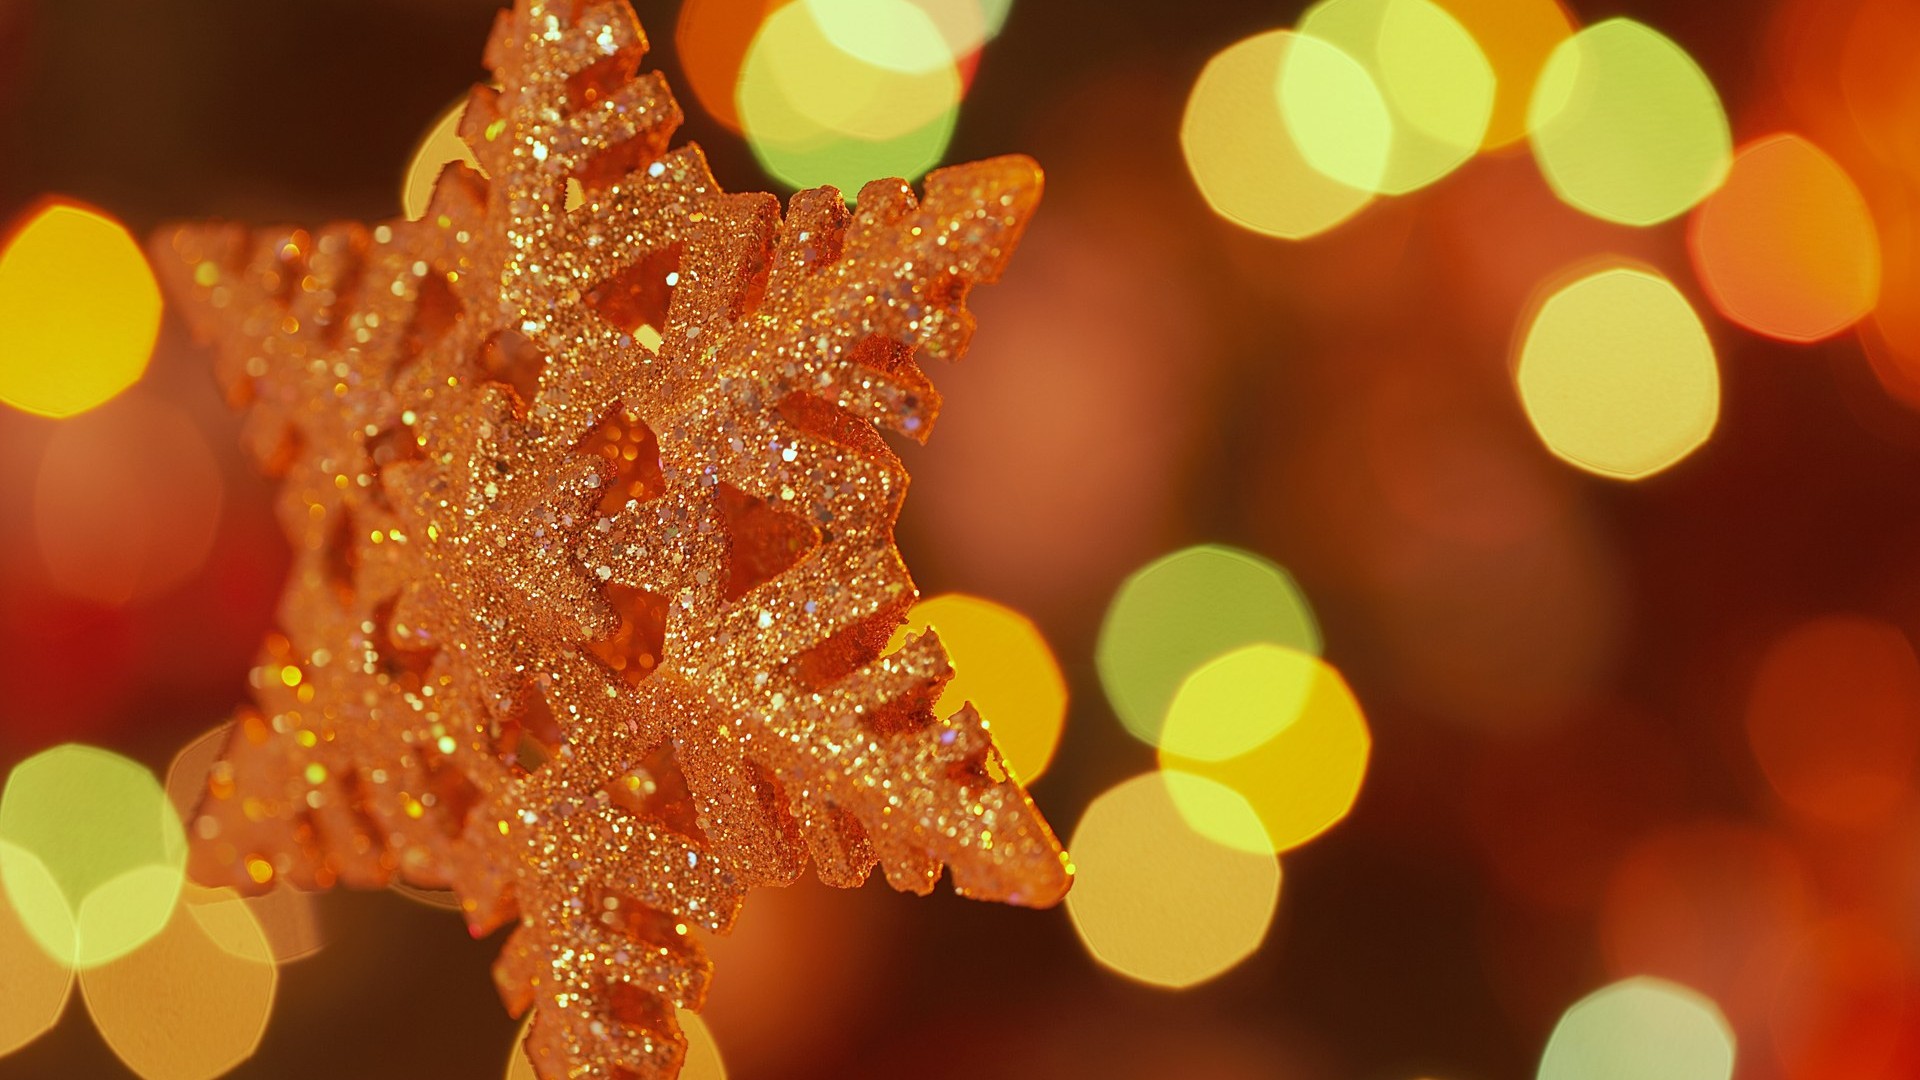 Happy Christmas decorations wallpapers #1 - 1920x1080